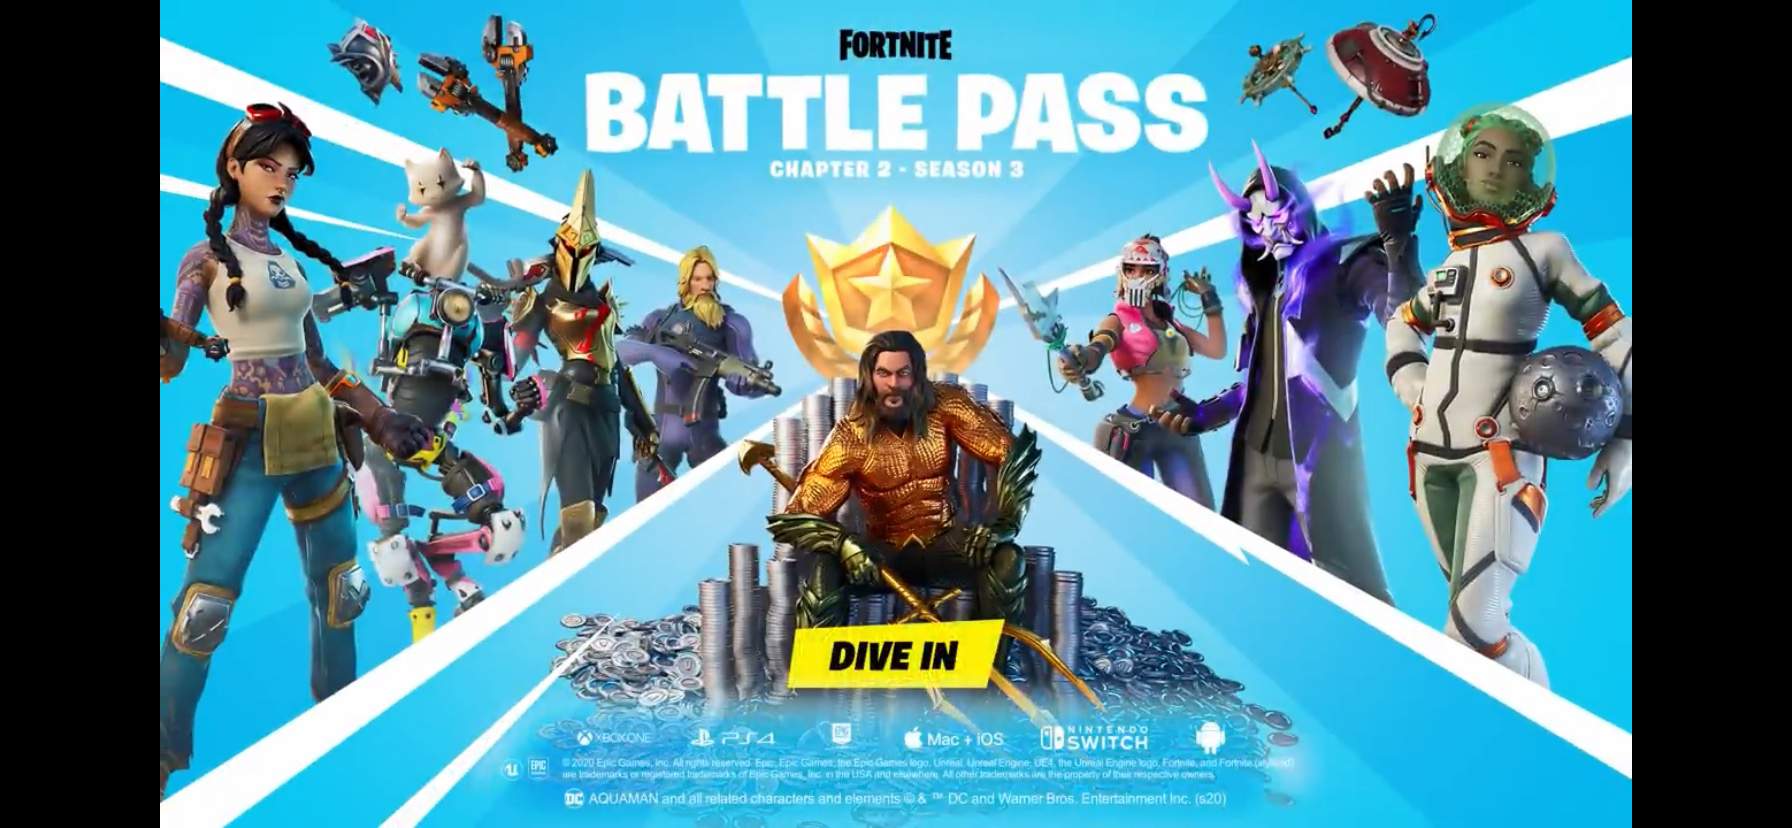 My Reaction To Every Chapter 2 Season 3 Battle Pass Skin Fortnite